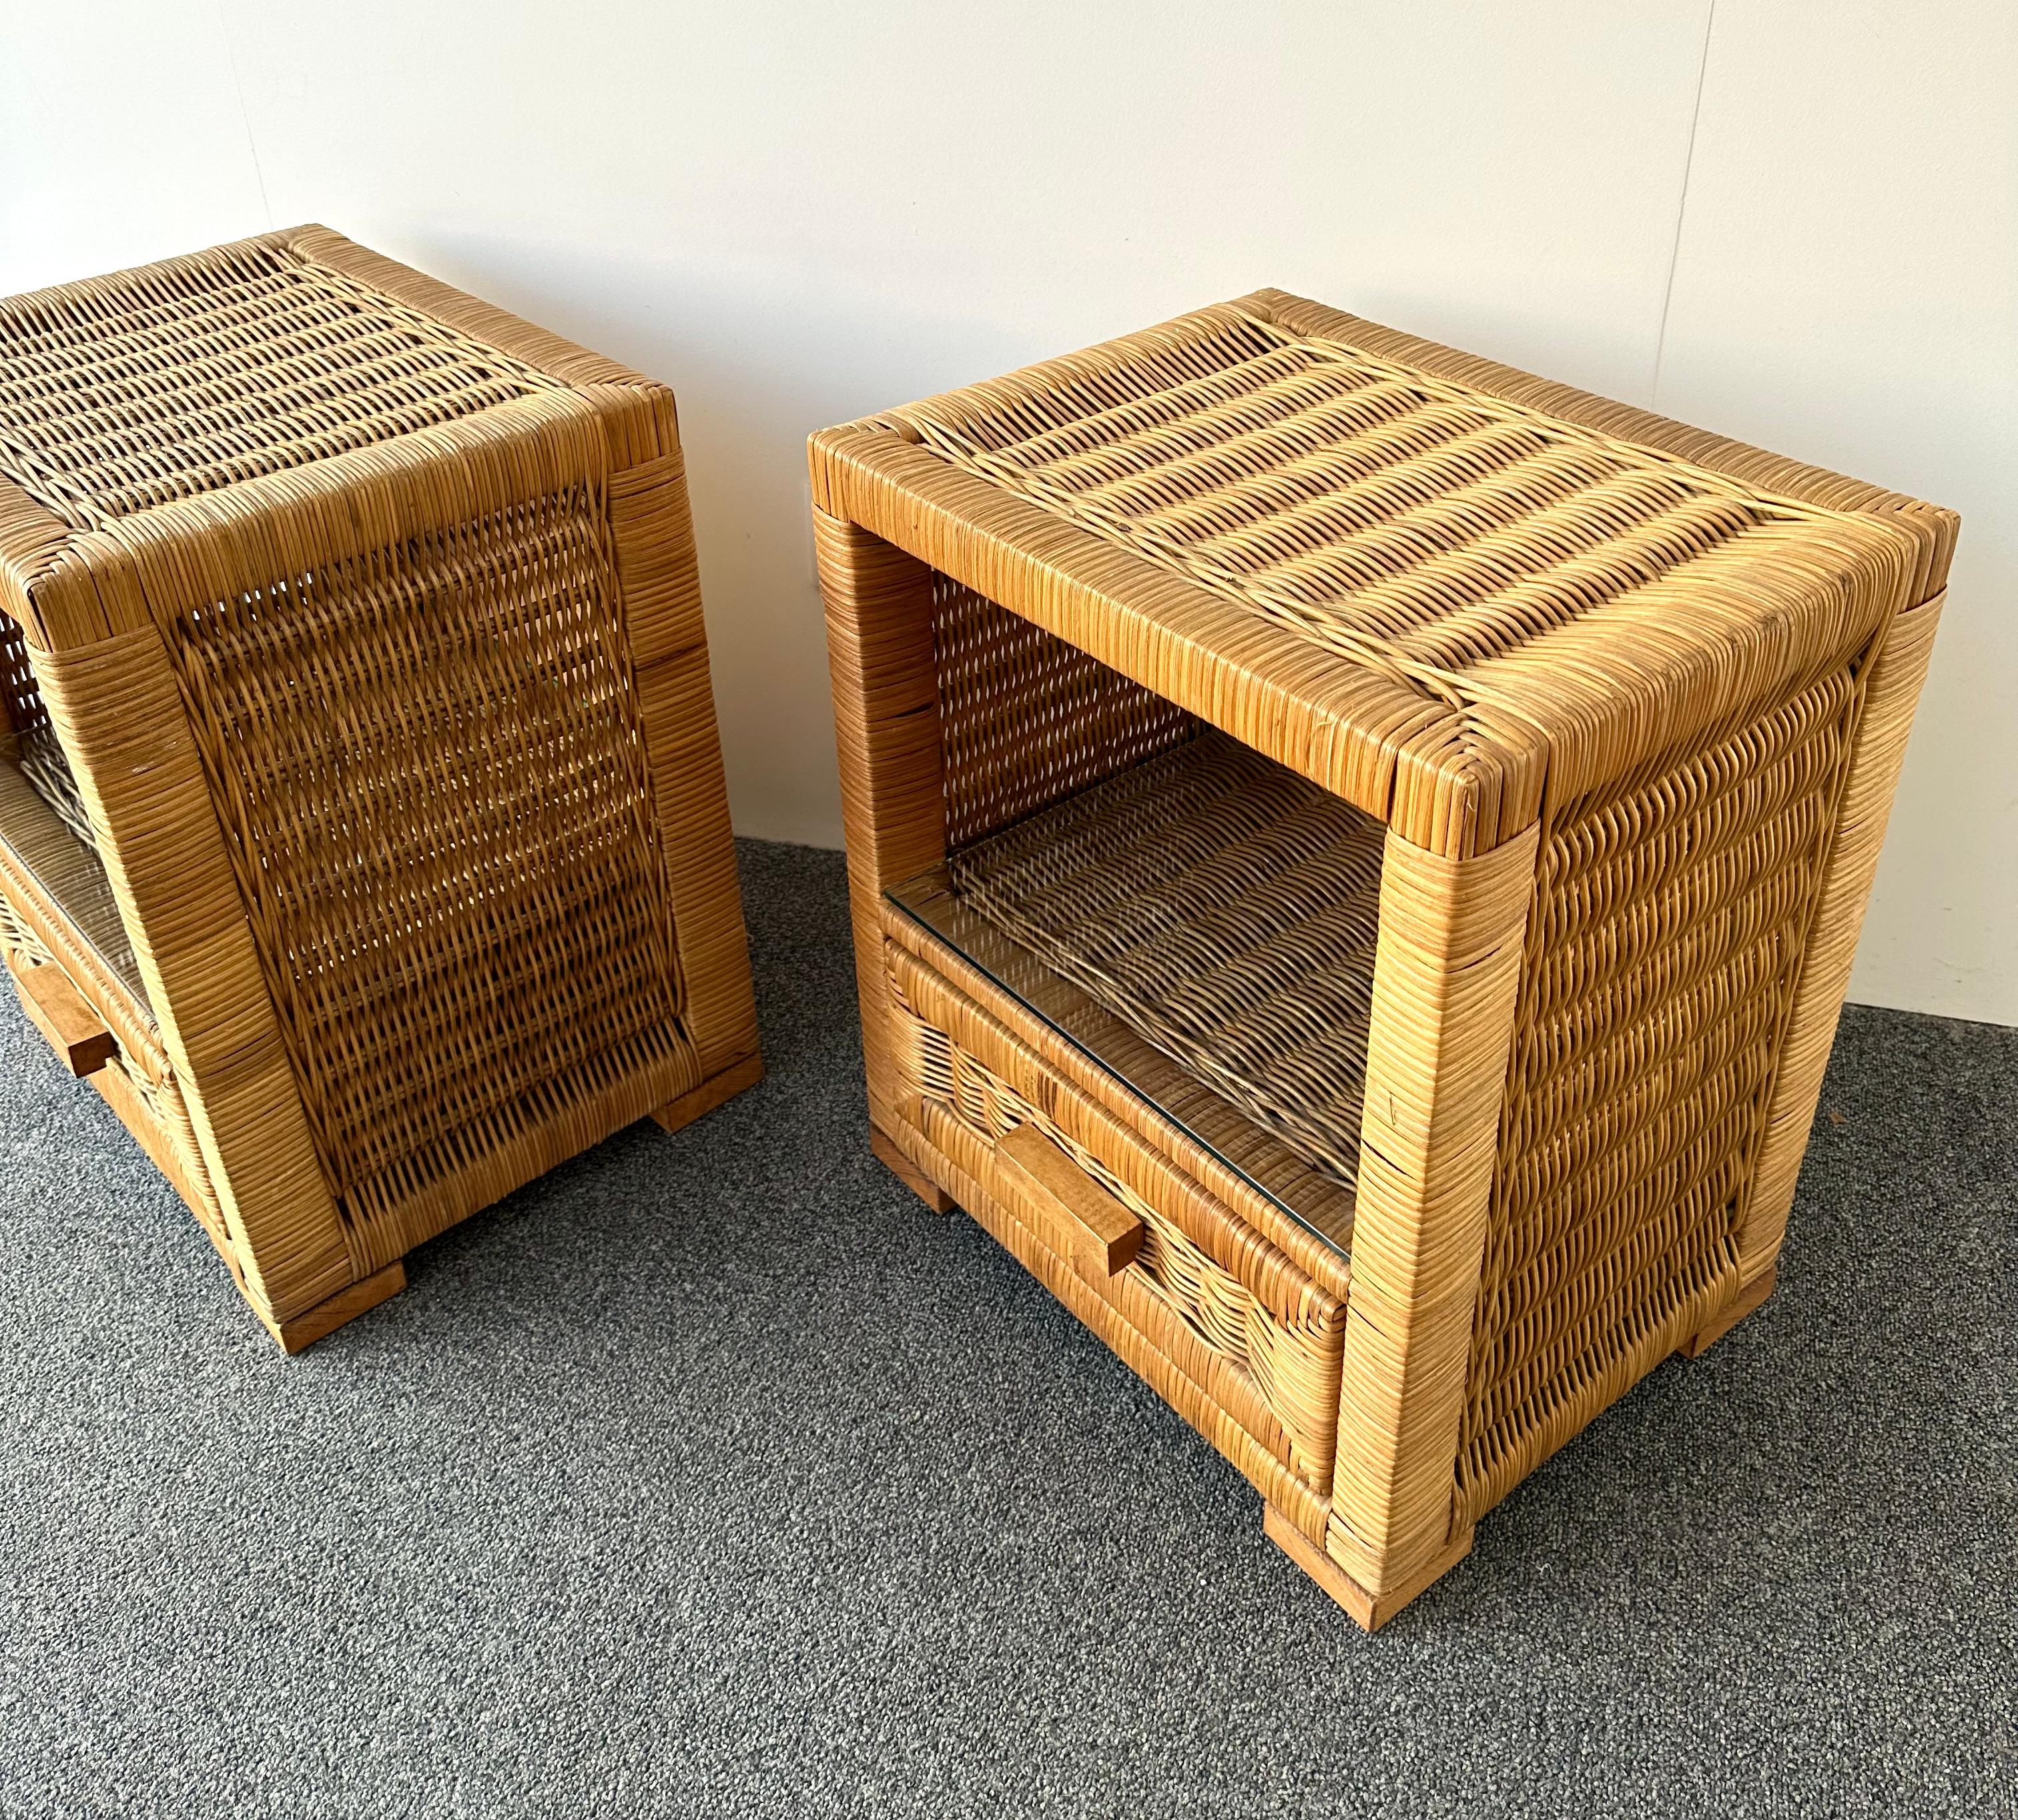 Pair of Rattan Bedside Tables by Tito Agnoli, Italy, 1970s For Sale 6